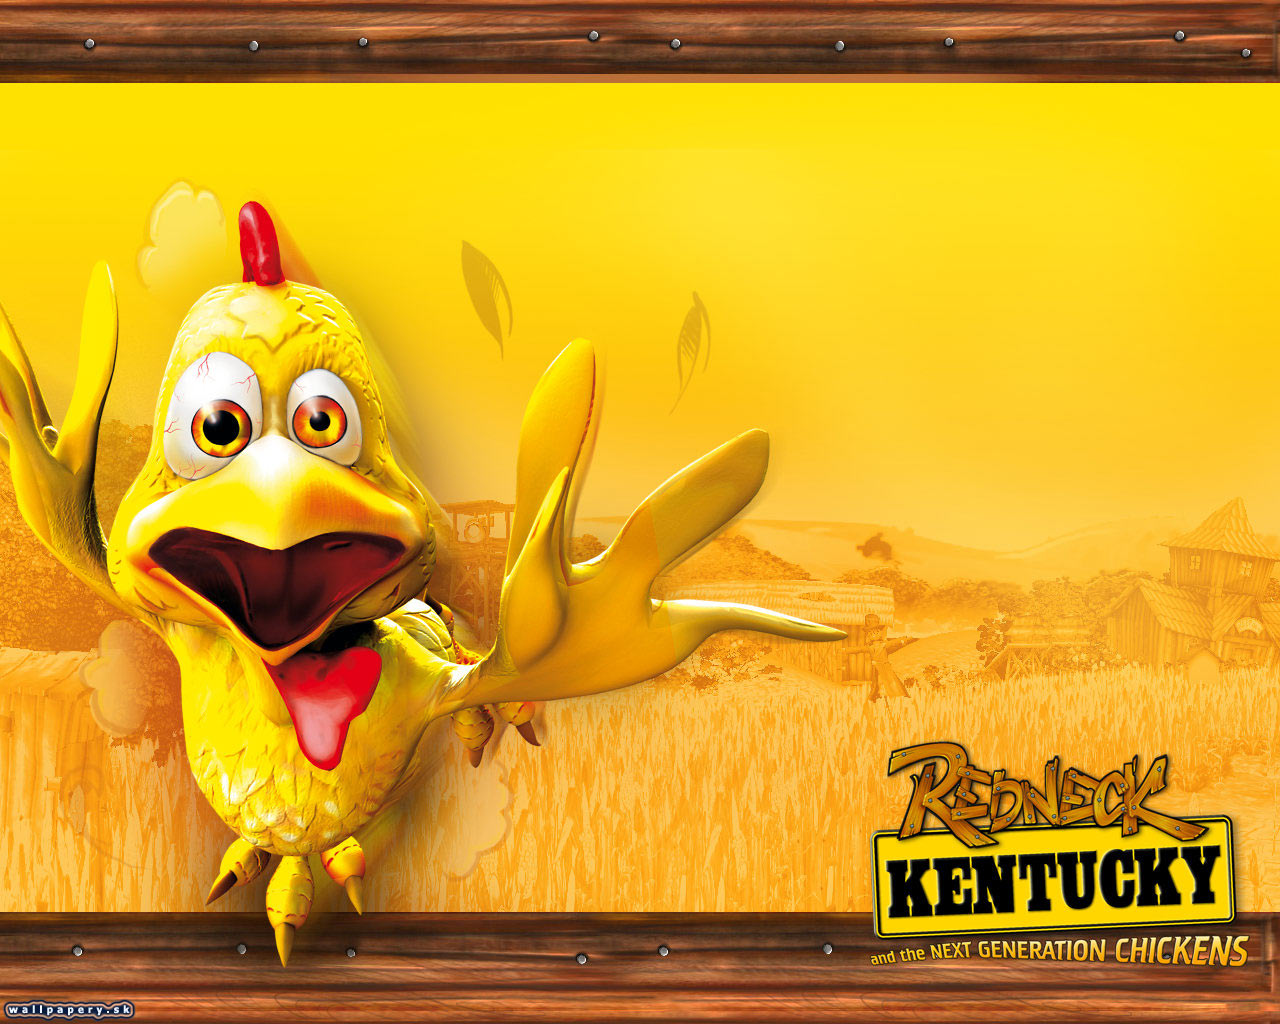 Redneck Kentucky and the Next Generation Chickens - wallpaper 3